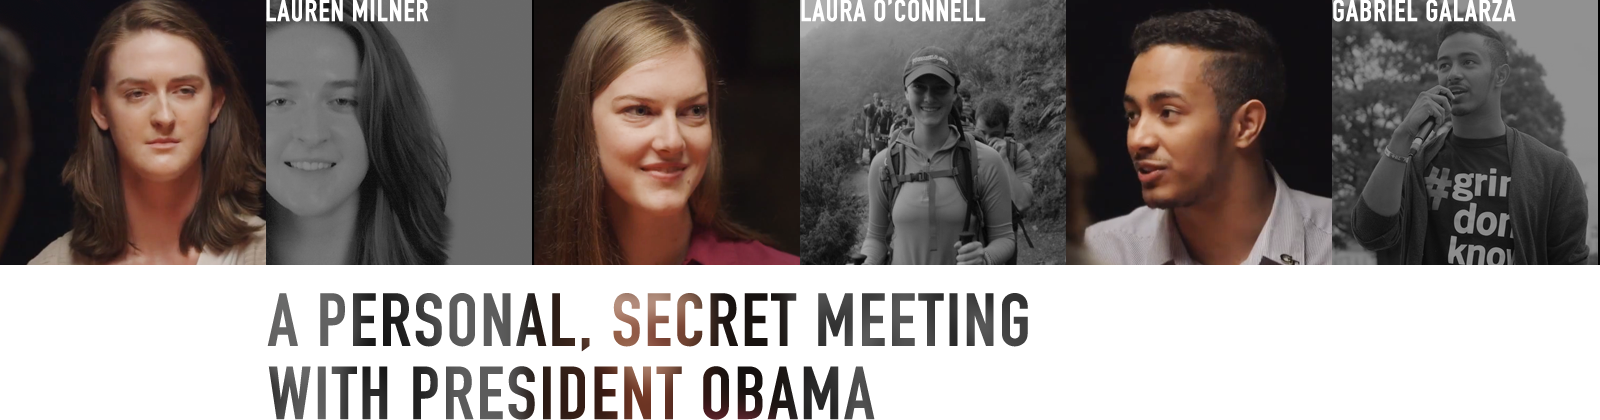 A personal, secret meeting with President Obama